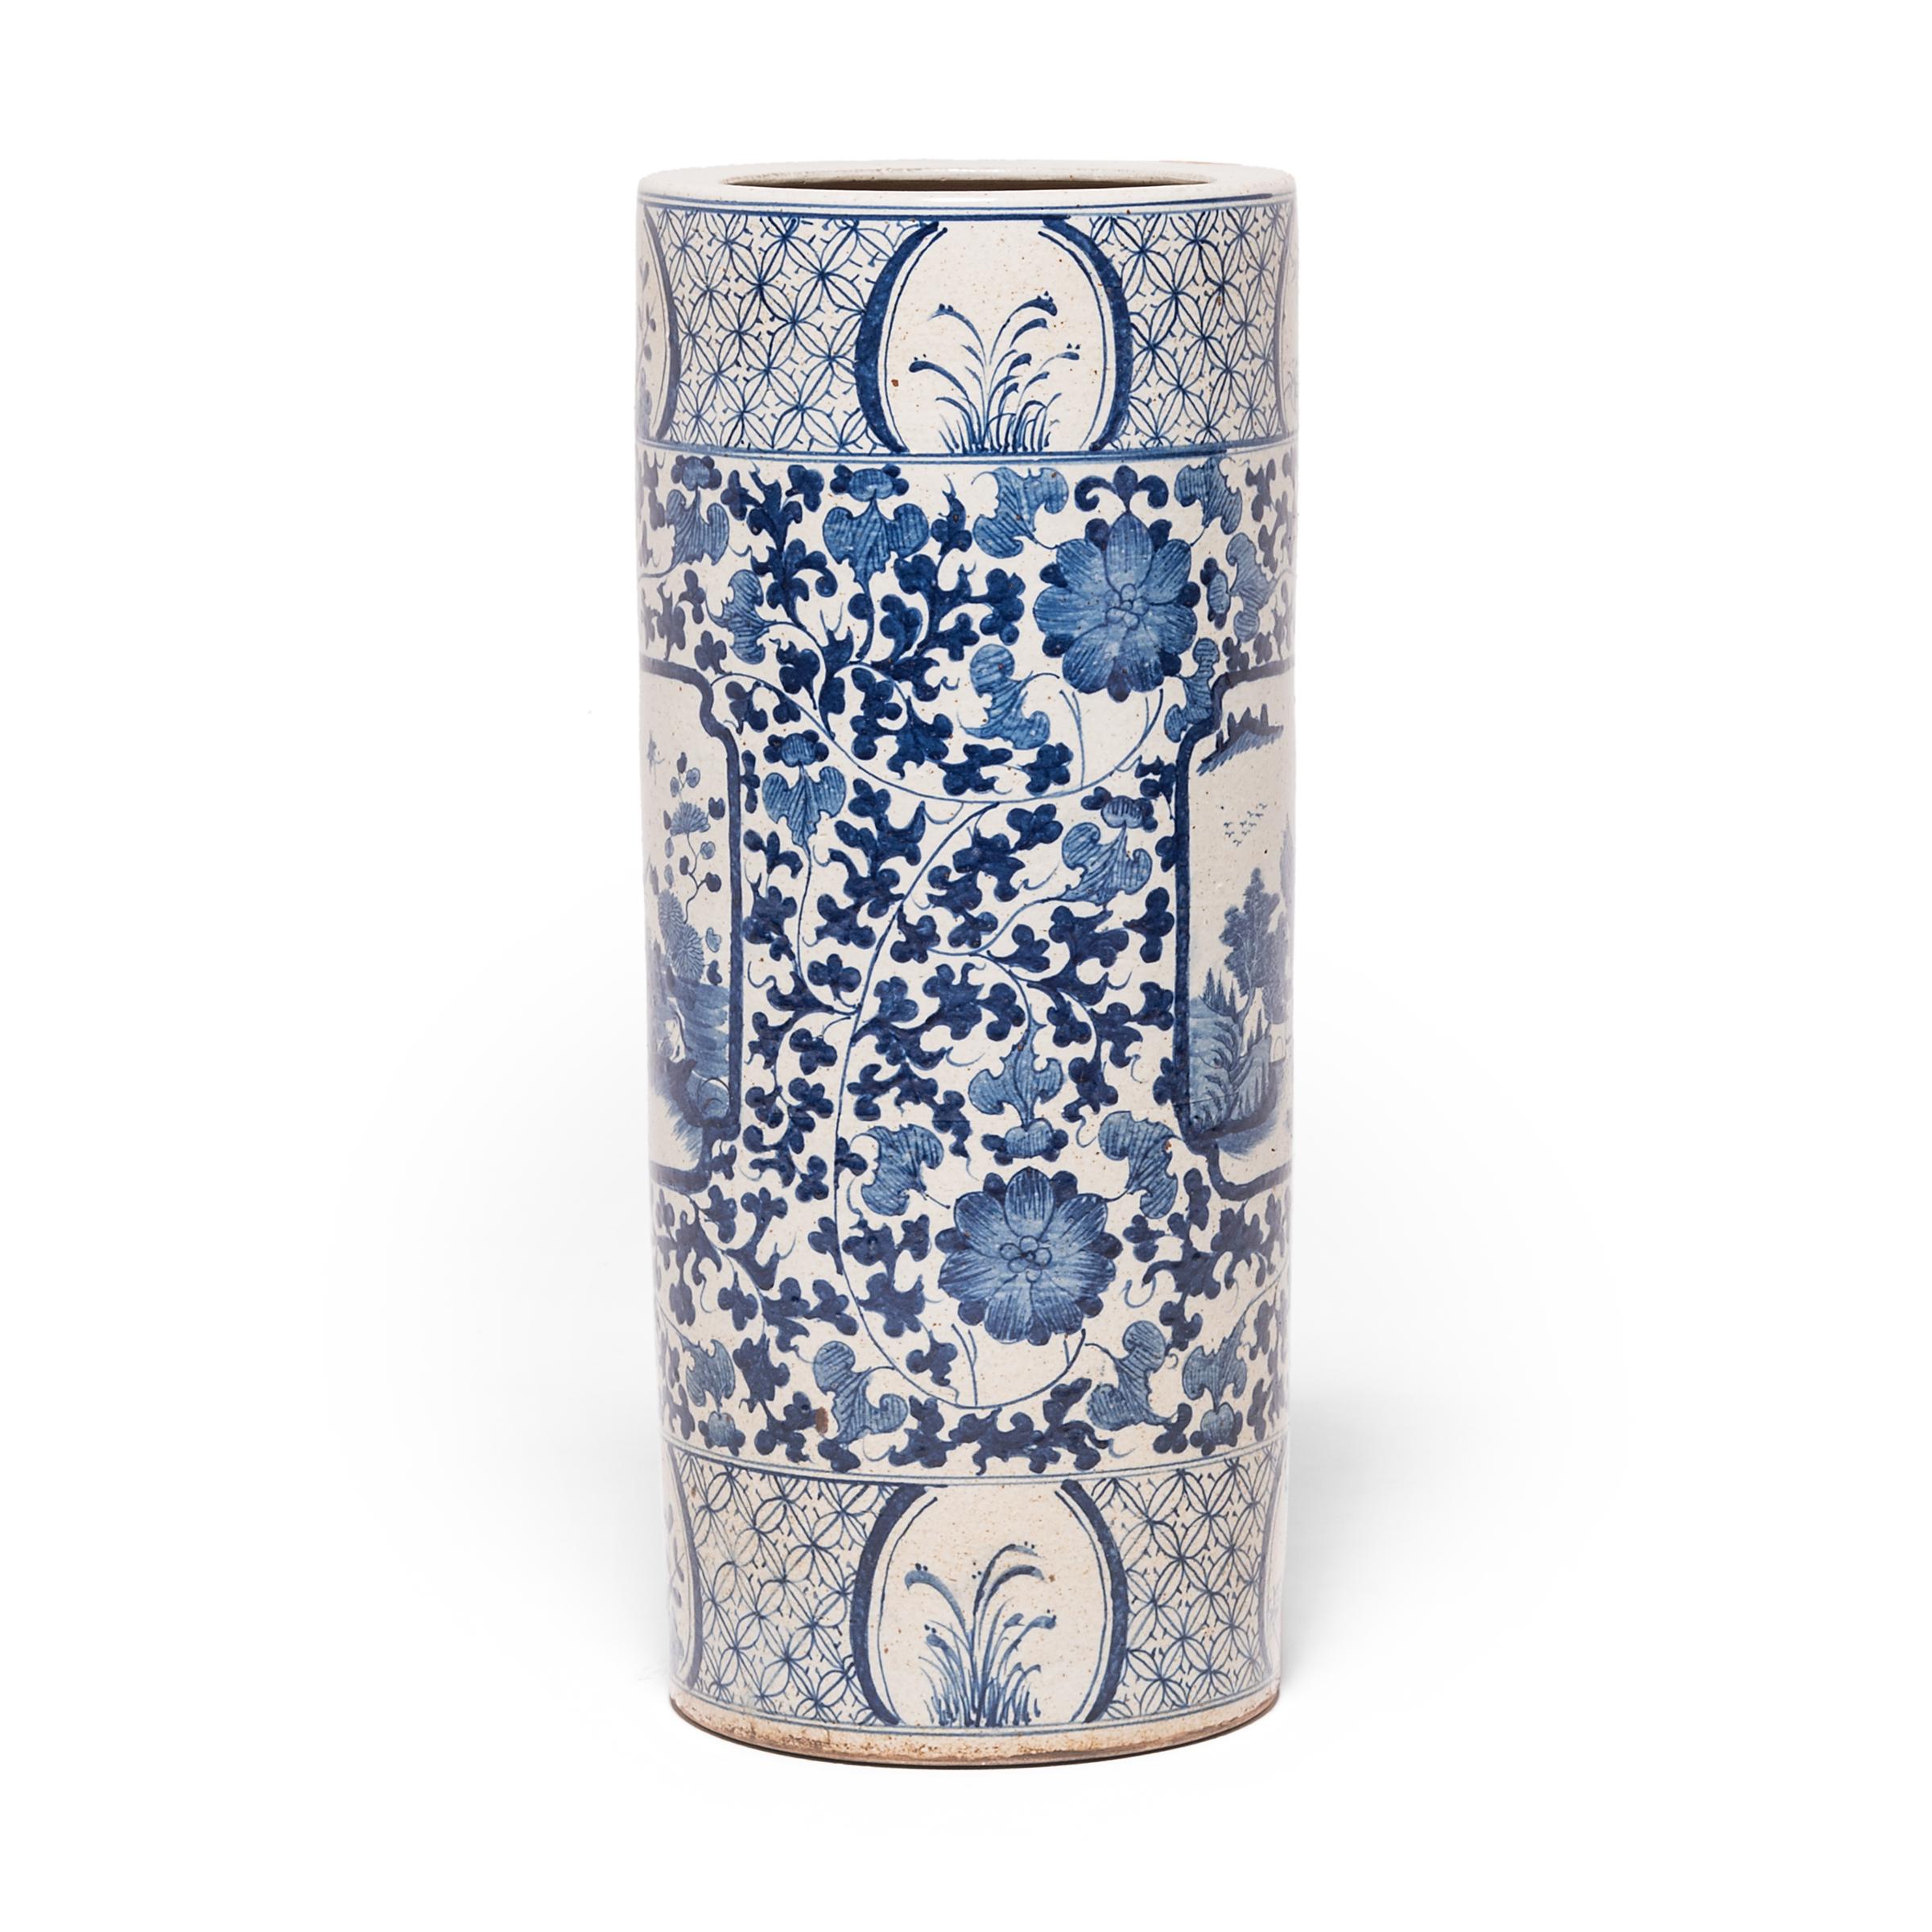 This contemporary Chinese blue and white vessel was hand-painted with birds, flowers, trailing vines in a brilliant cobalt blue glaze against a creamy white background. One side of the vessel bears a traditional landscape painting, known as a 